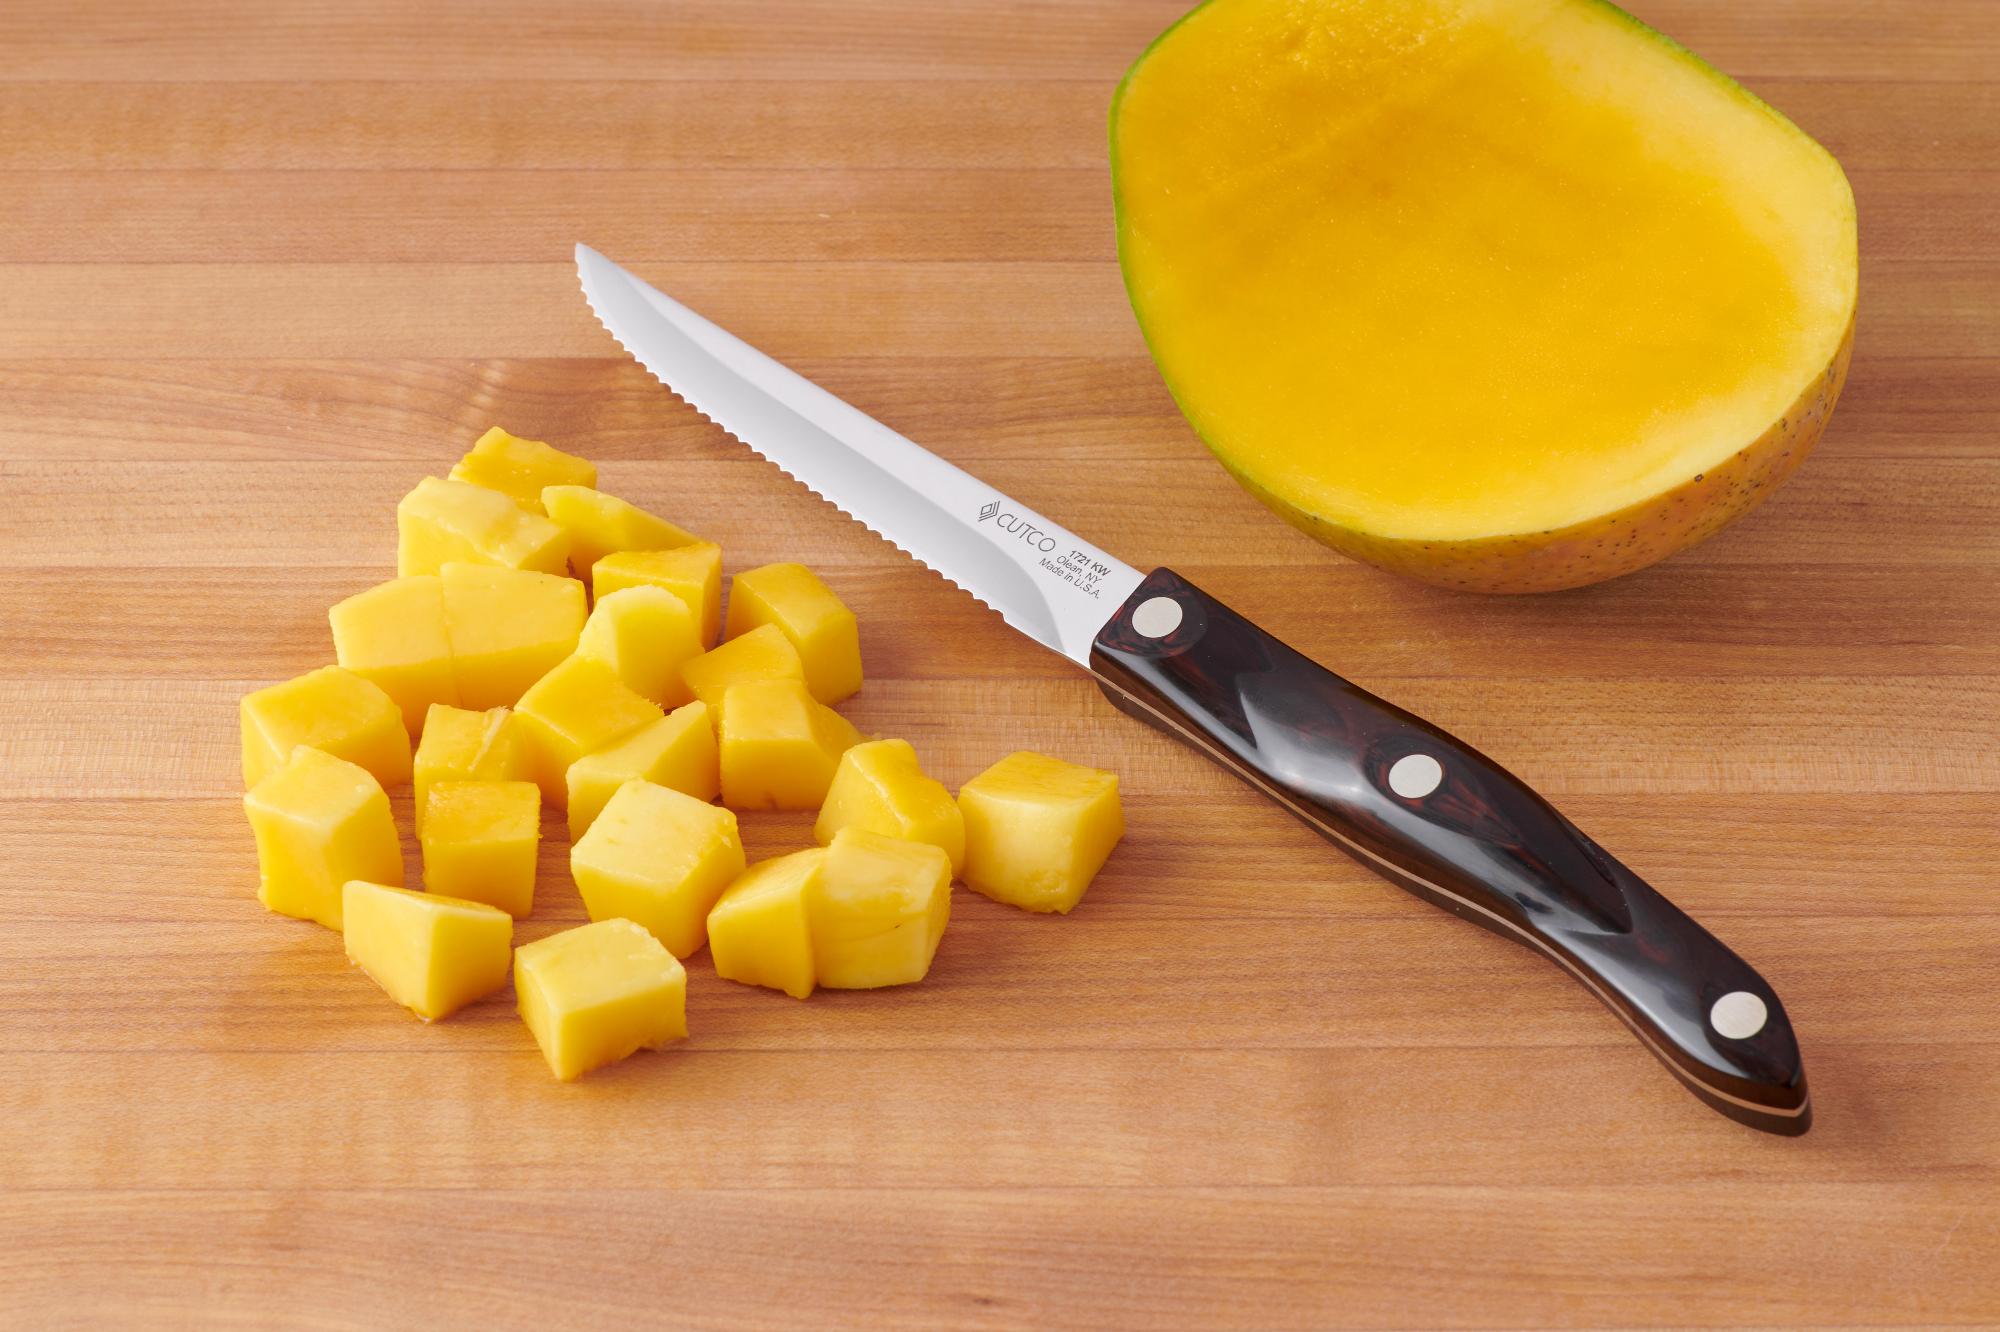 Cut the mango with a Trimmer